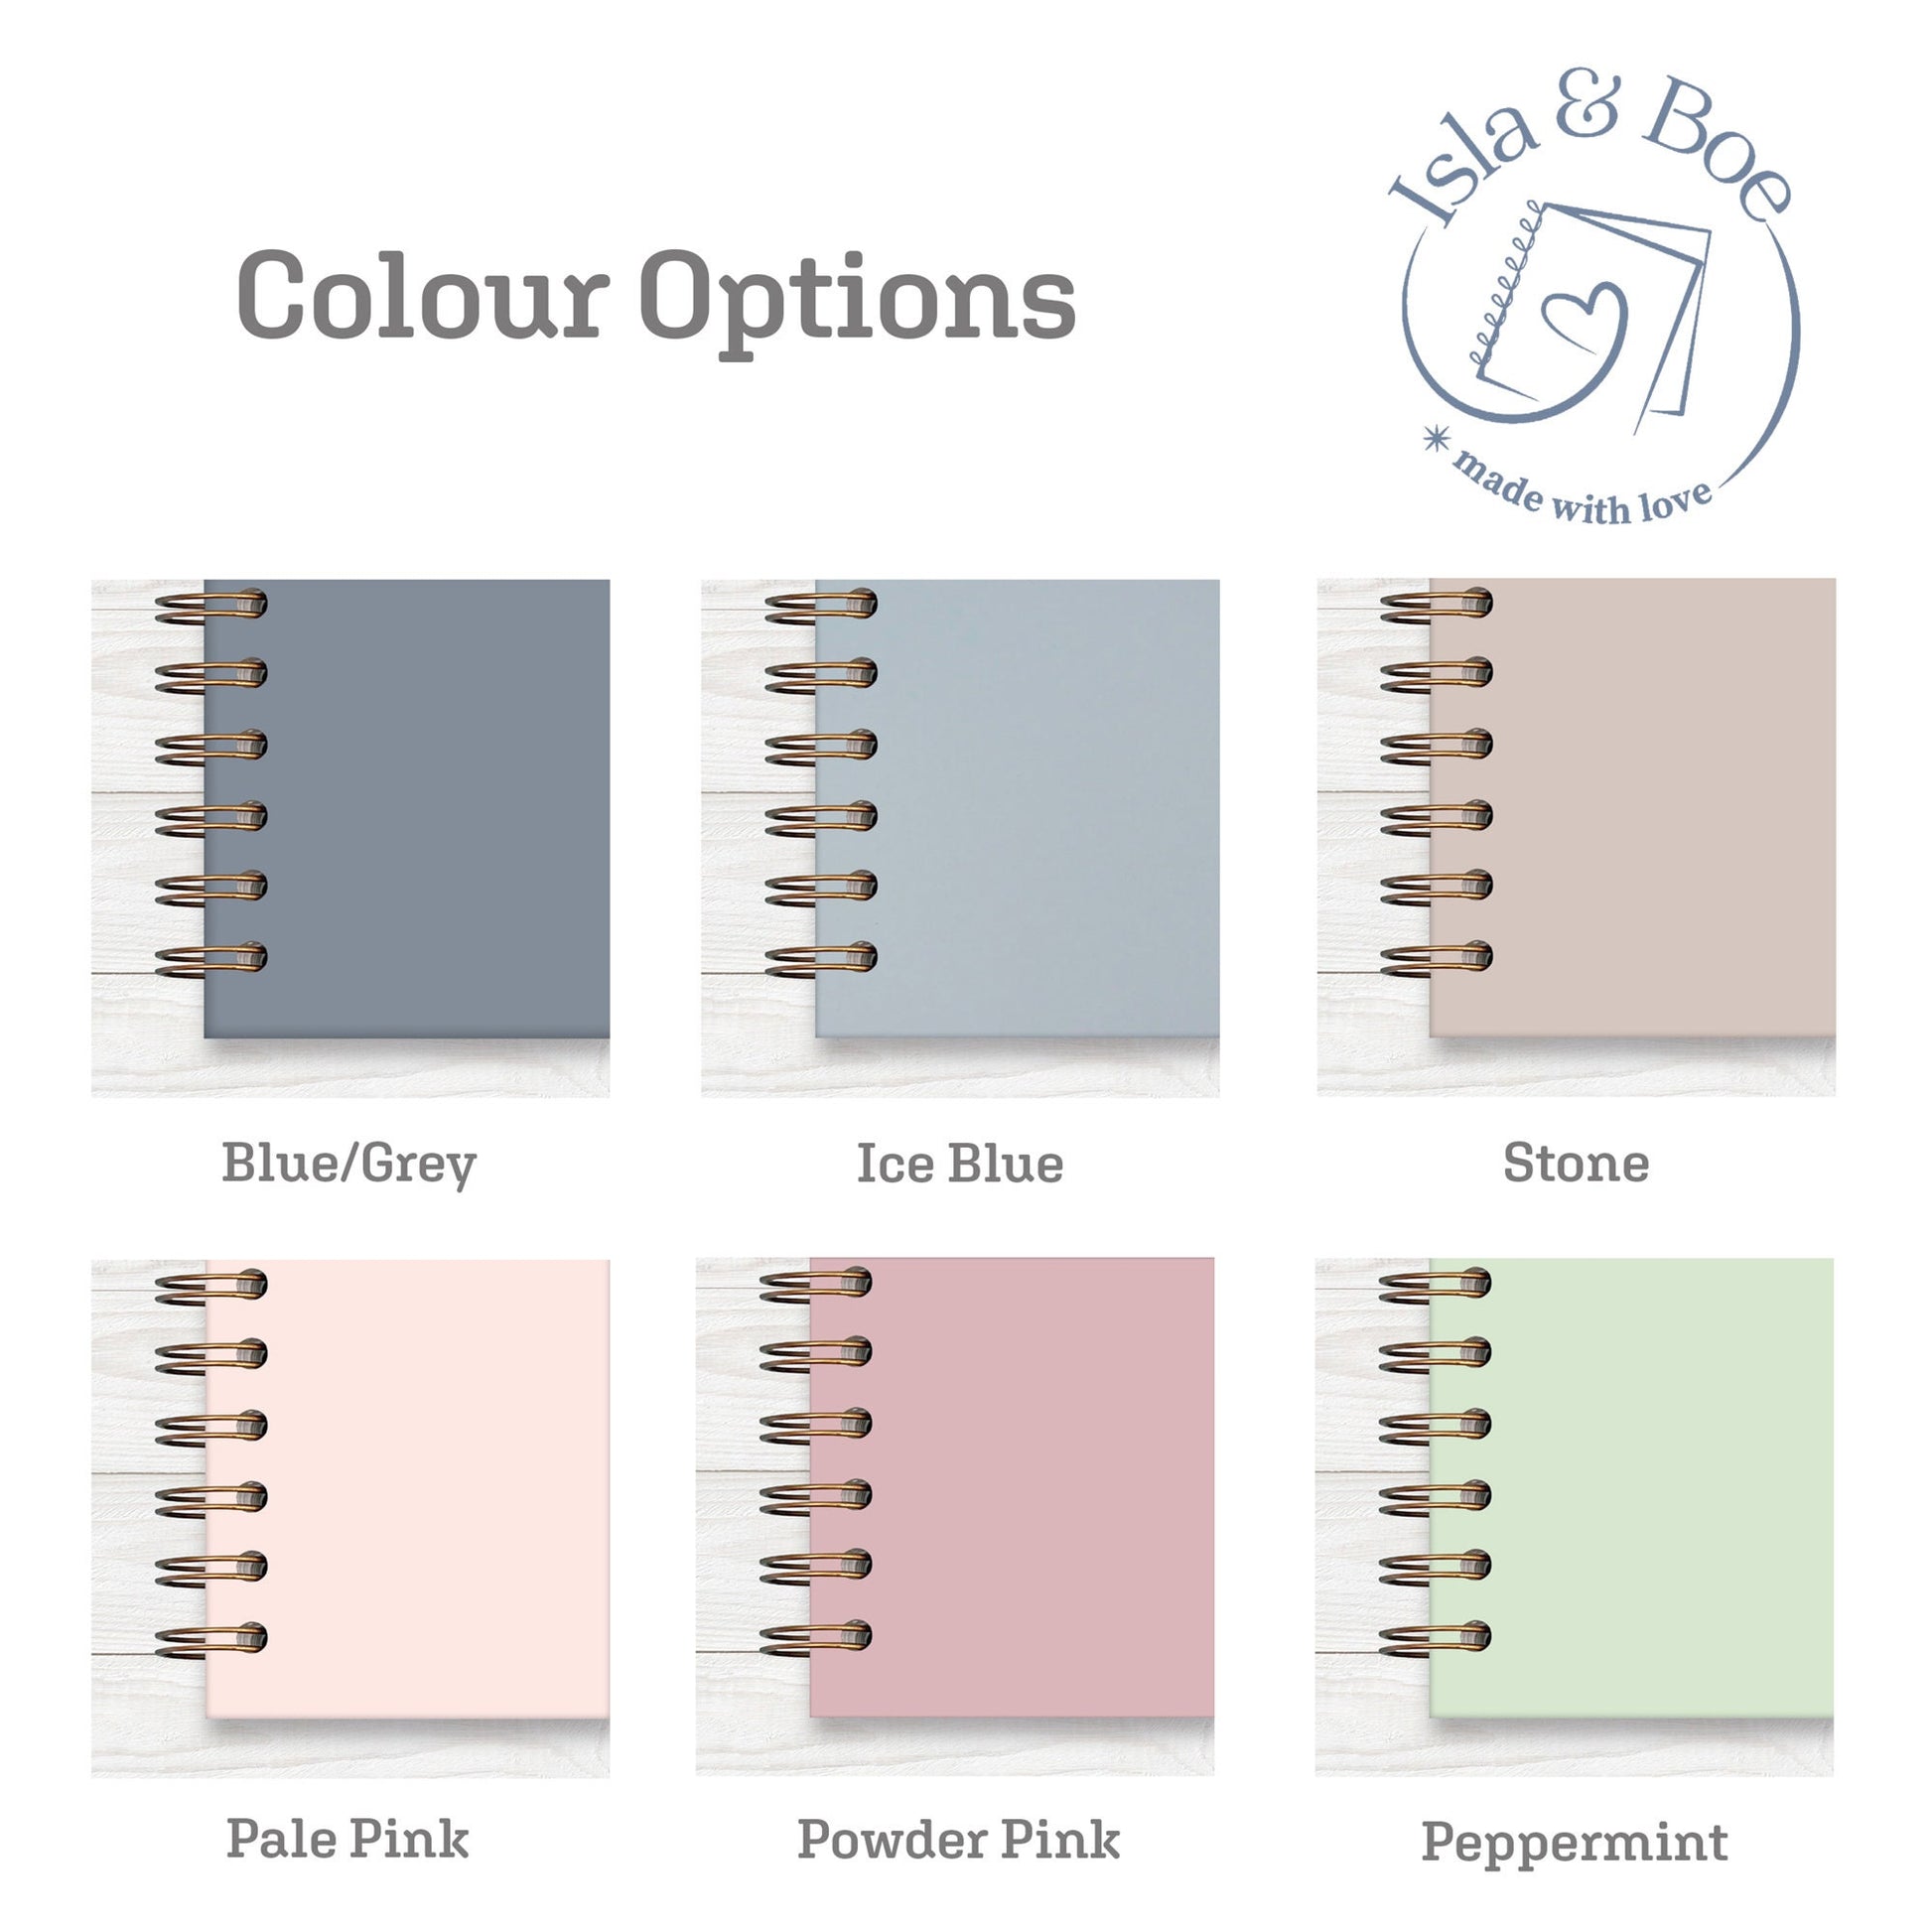 Colour option swatch for the memory books. Blue/grey, Ice Blue, Stone, Pale Pink, Powder Pink and Peppermint